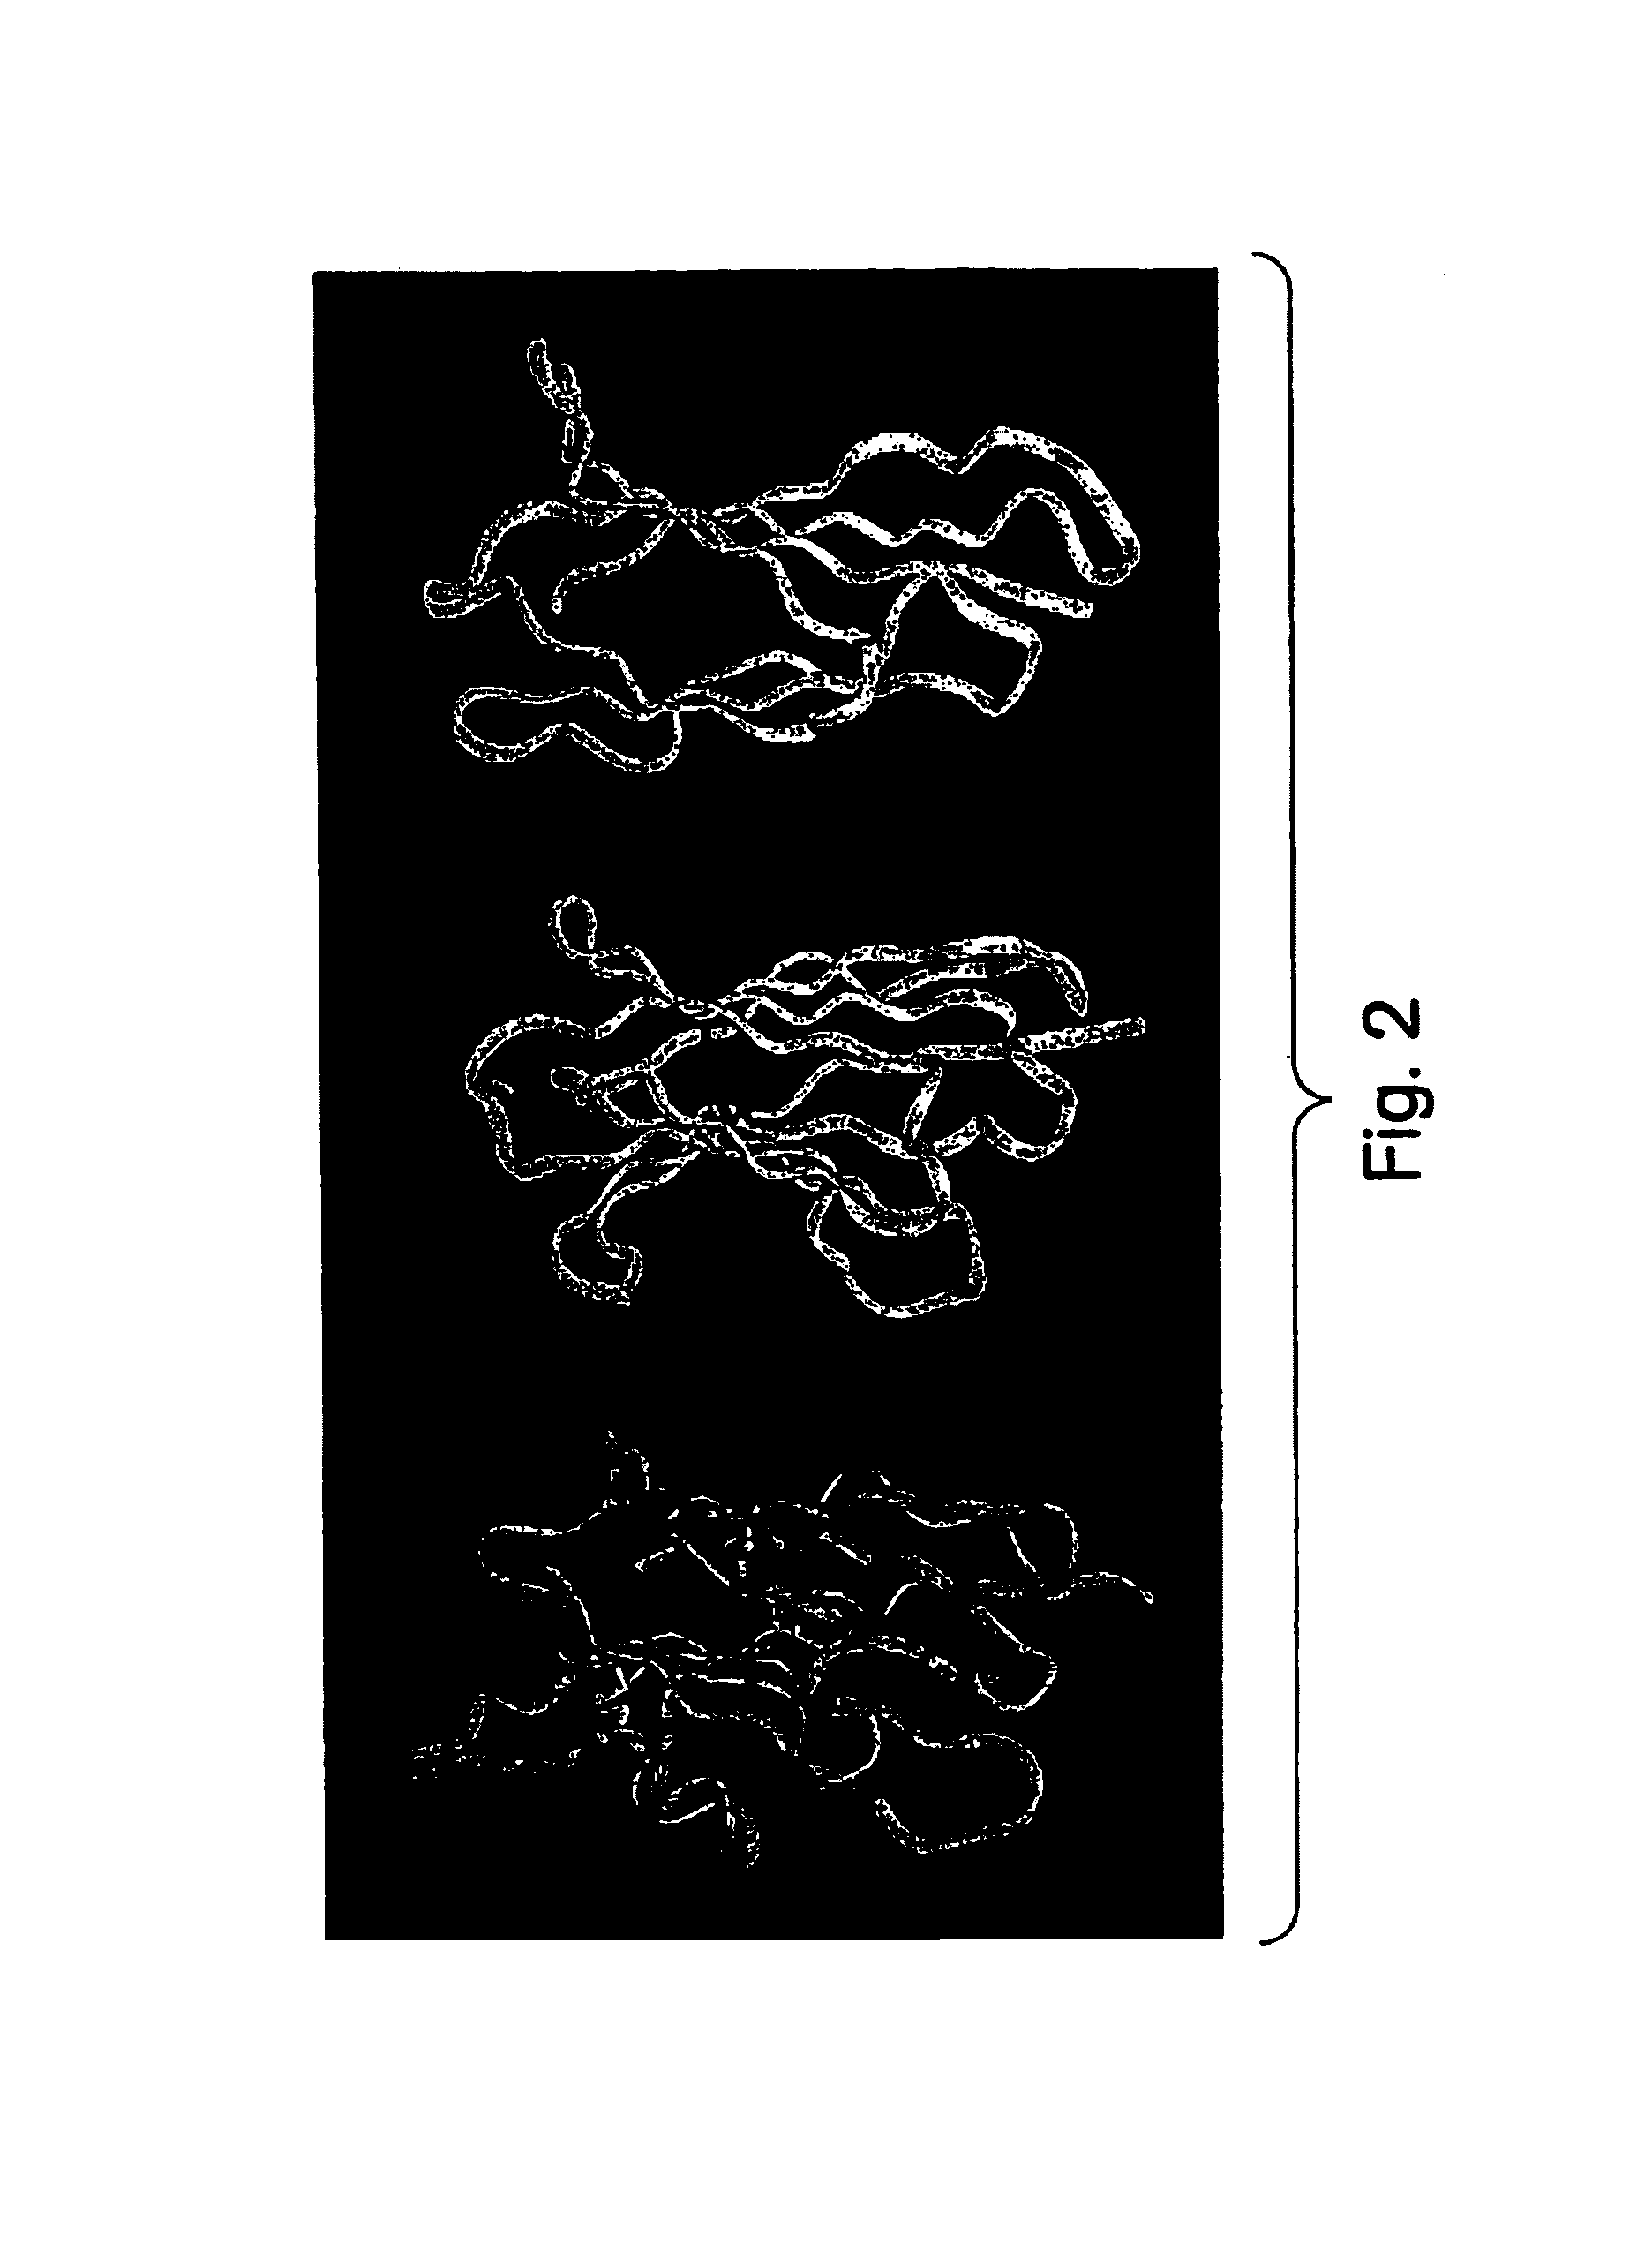 Protein scaffolds for antibody mimics and other binding proteins